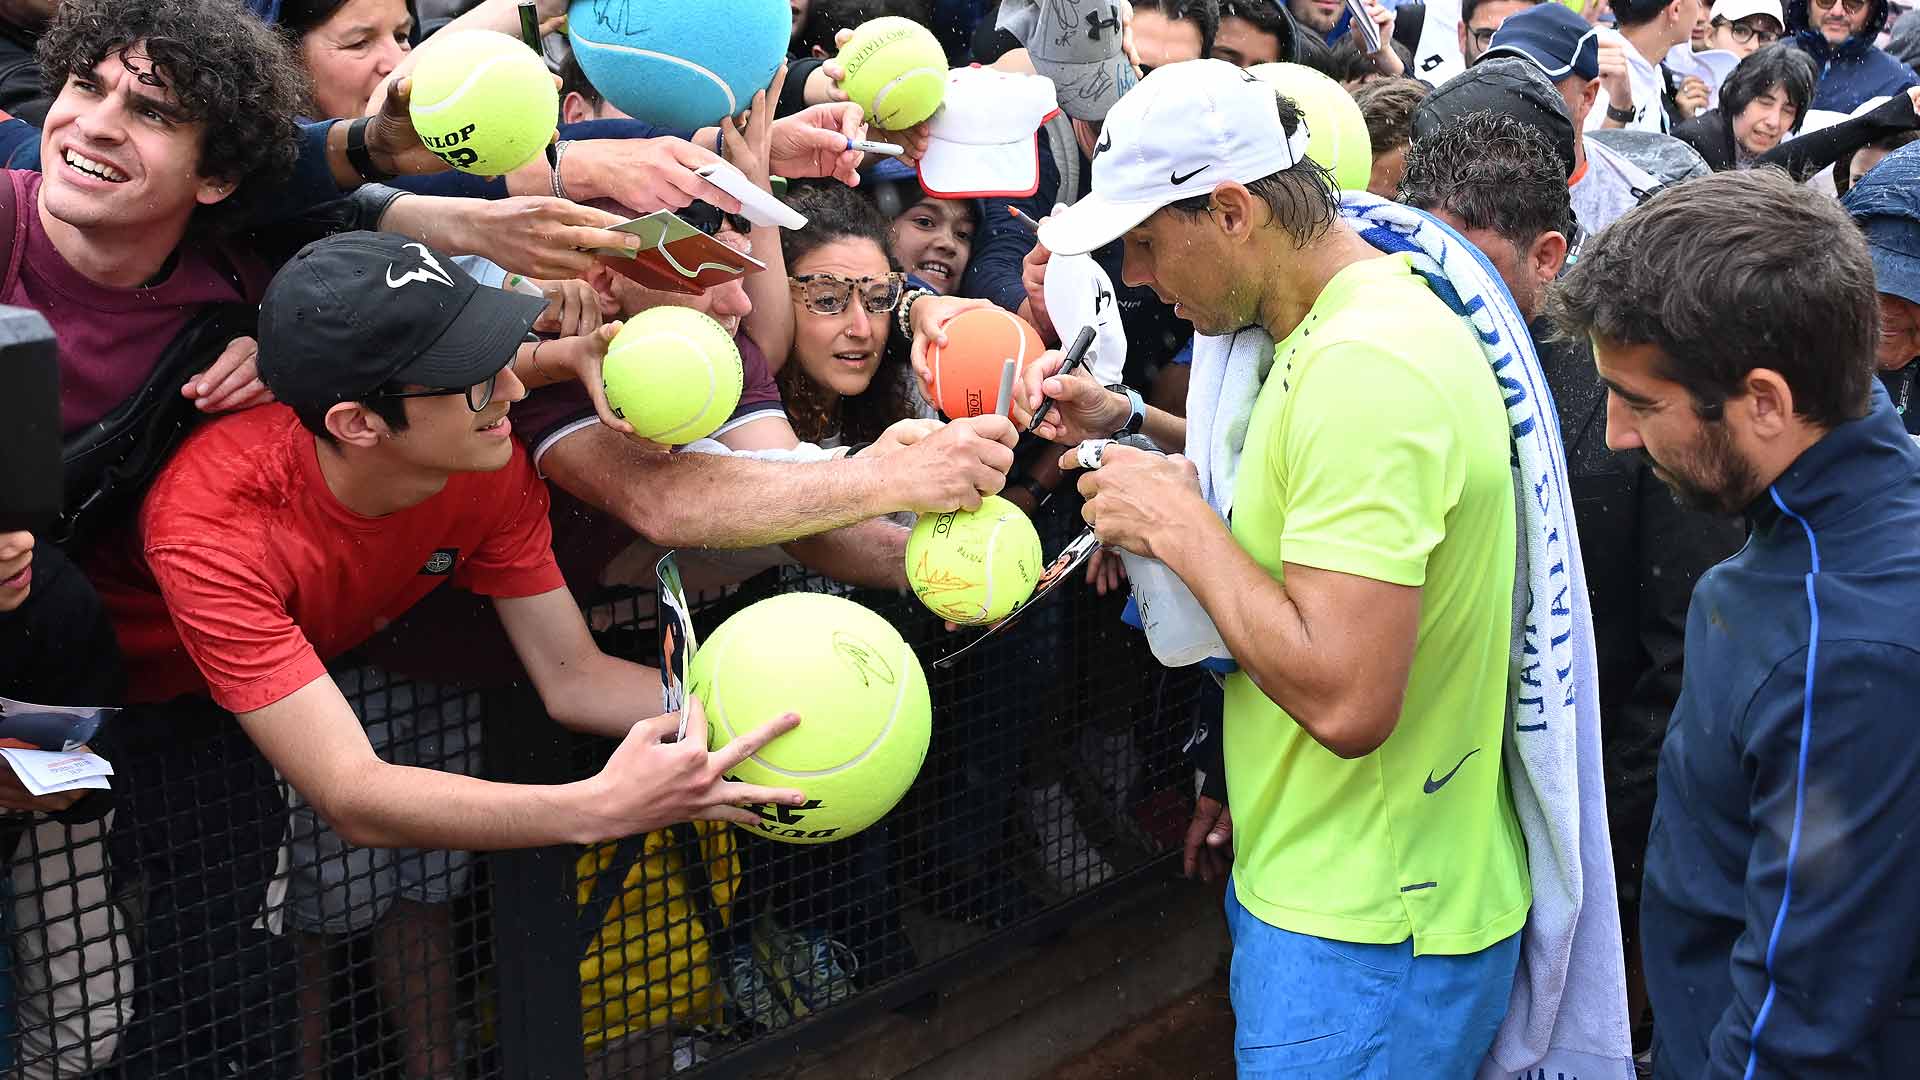 Rafael Nadal signs autographs for fans Monday at the Foro Italico.